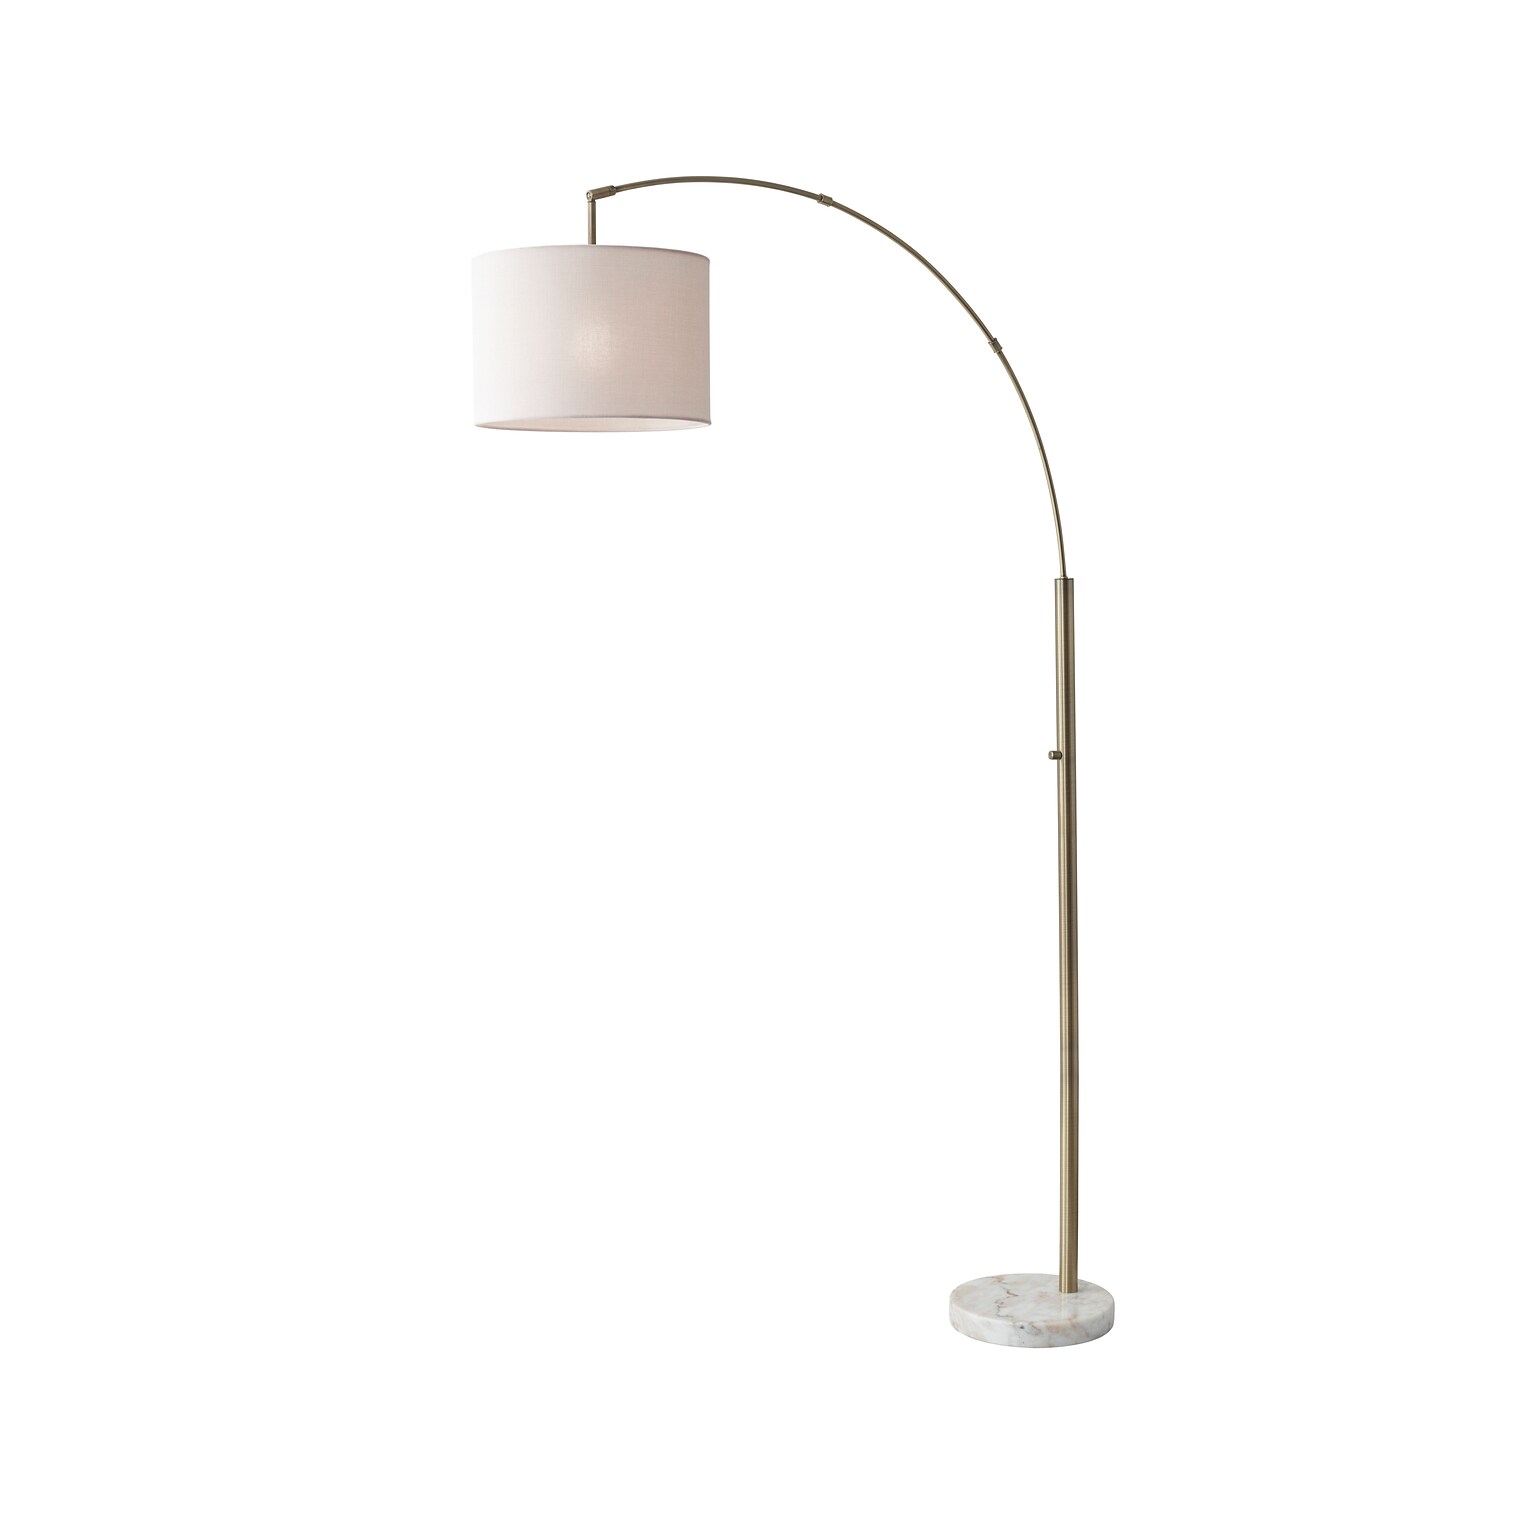 Adesso® Bowery 73.5H Antique Brass Arc Floor Lamp with Off-White Textured Drum Shade (4249-21)